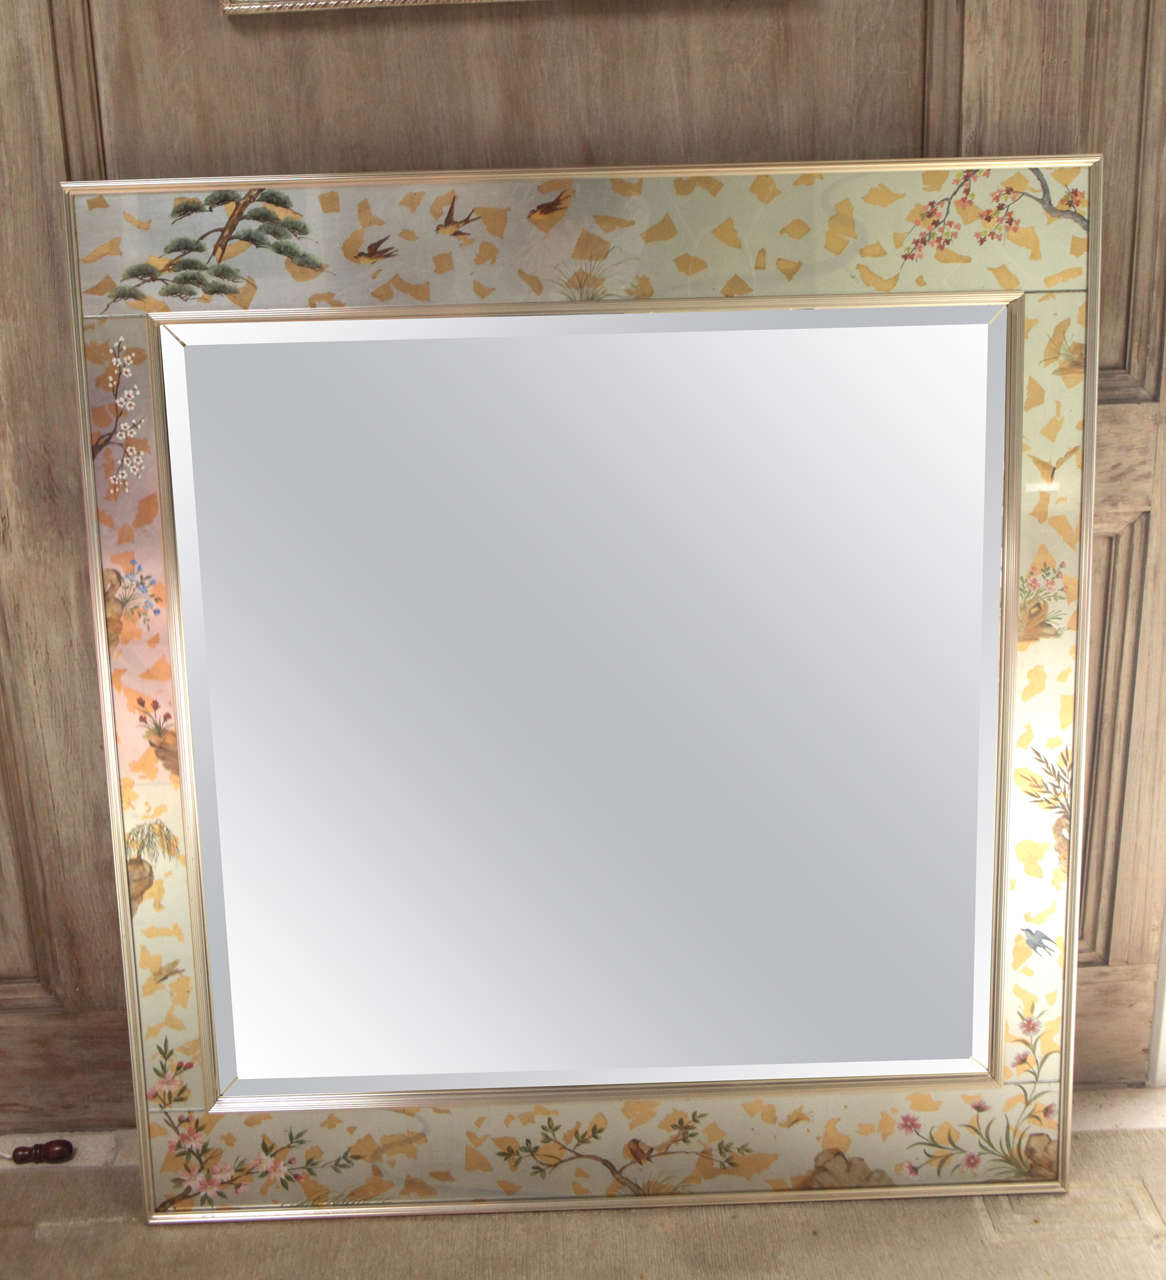 1980's La Barge Eglomise Mirror with Chinoiserie and Hand Painted Frame Details.